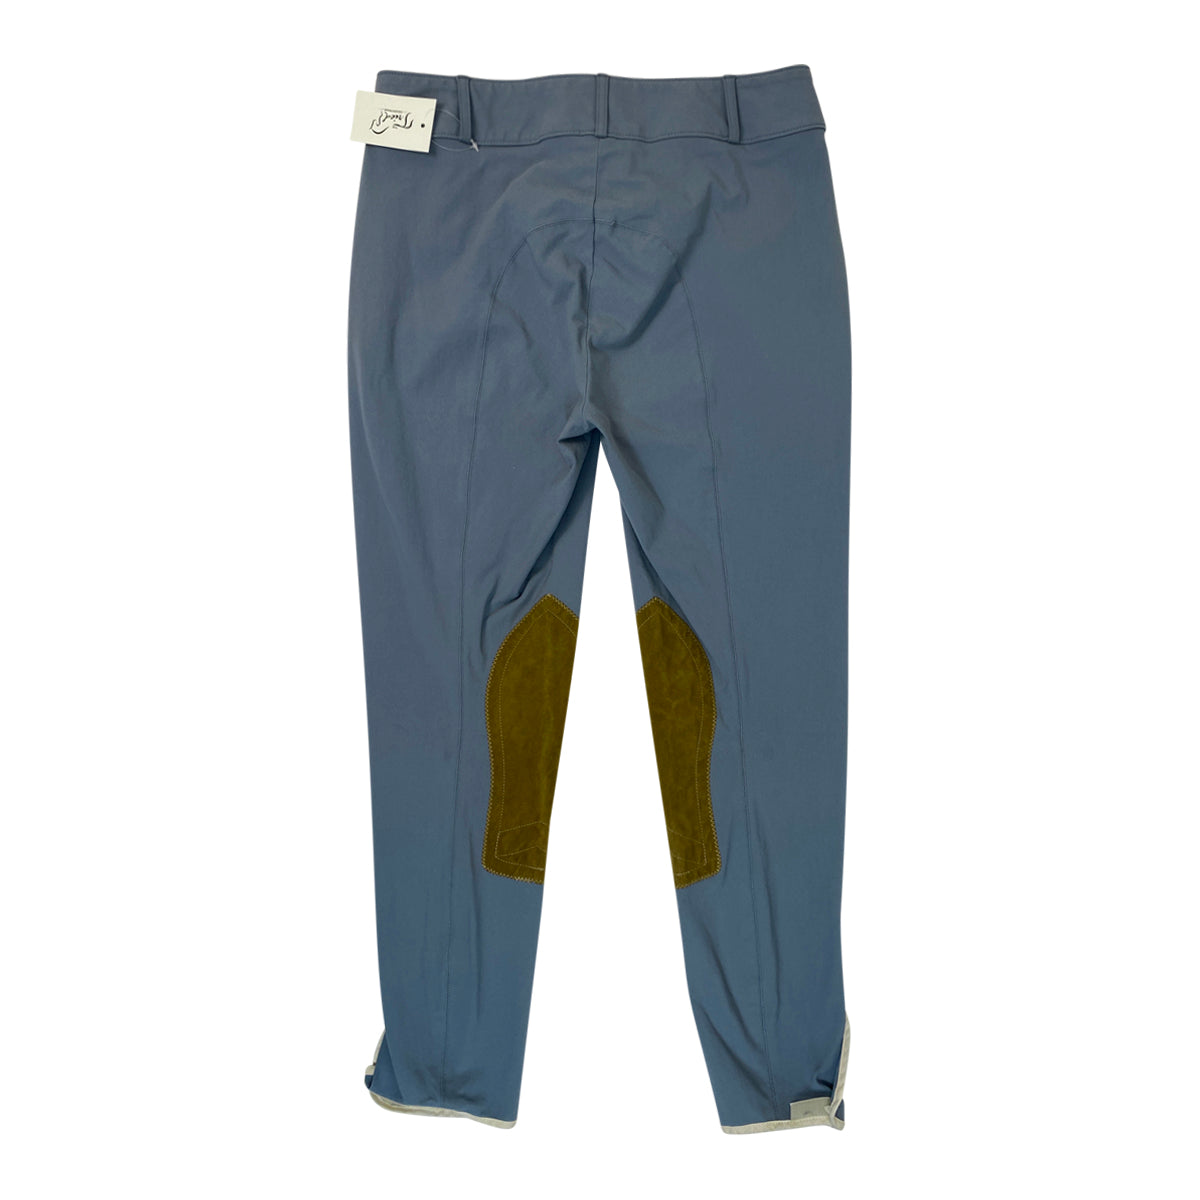 Tailored Sportsman Trophy Hunter Breeches in Chambray/Tan